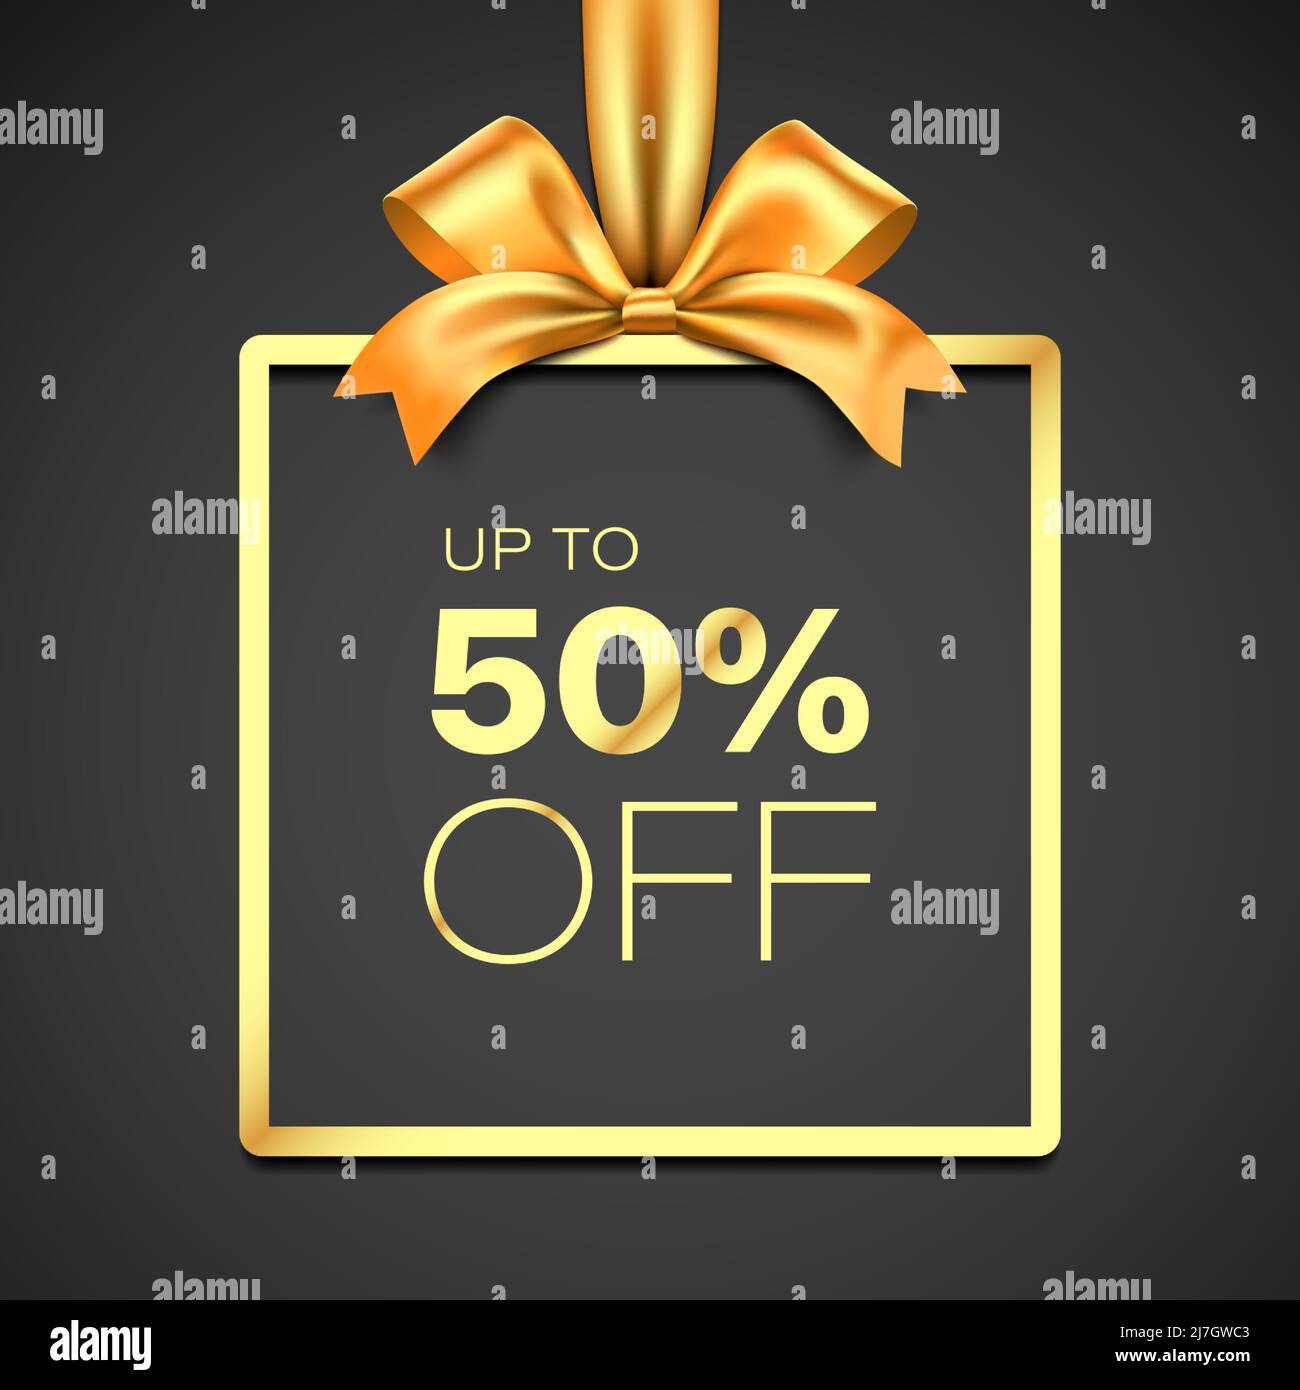 https://c8.alamy.com/comp/2J7GWC3/luxury-style-50-percent-discount-gift-card-vector-design-premium-golden-giftbox-frame-with-satin-ribbon-on-black-background-2J7GWC3.jpg